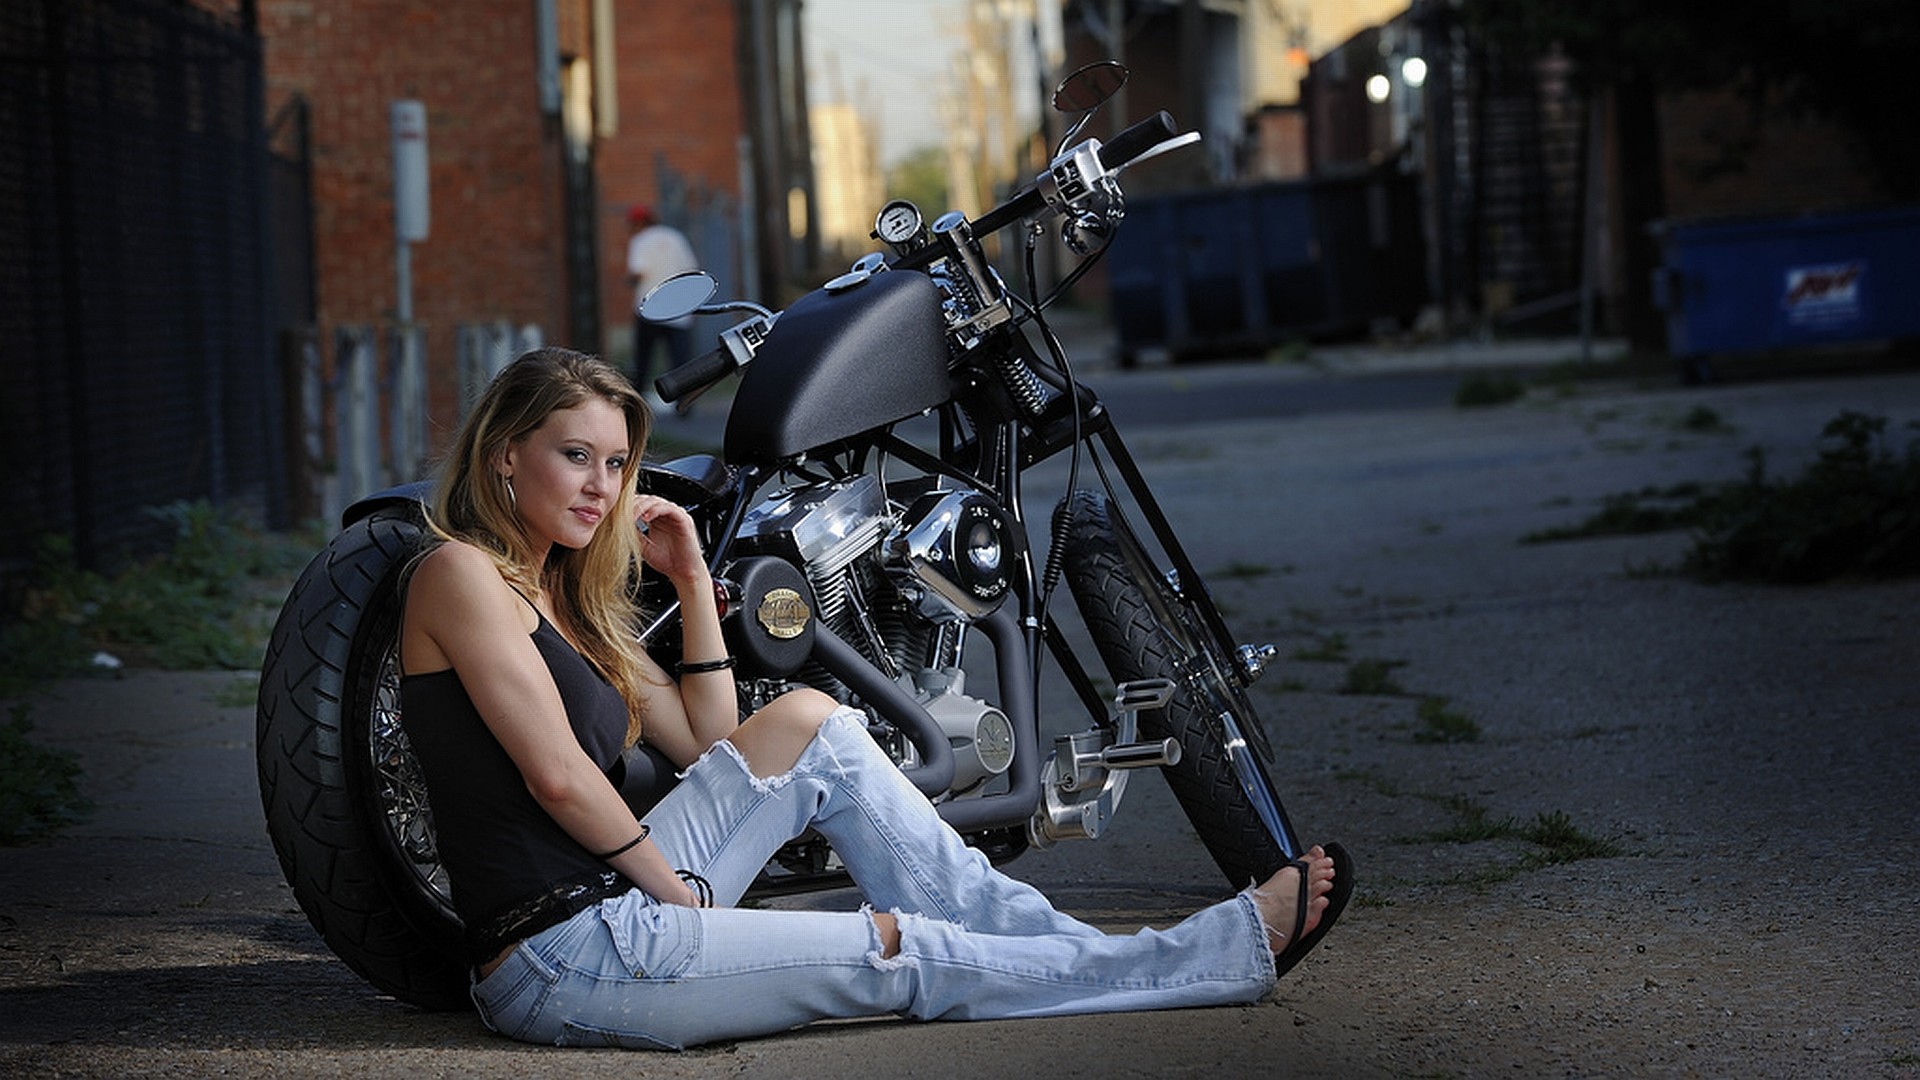 Abyss Everything Motorcycles Vehicles Girls Motorcycles 168343